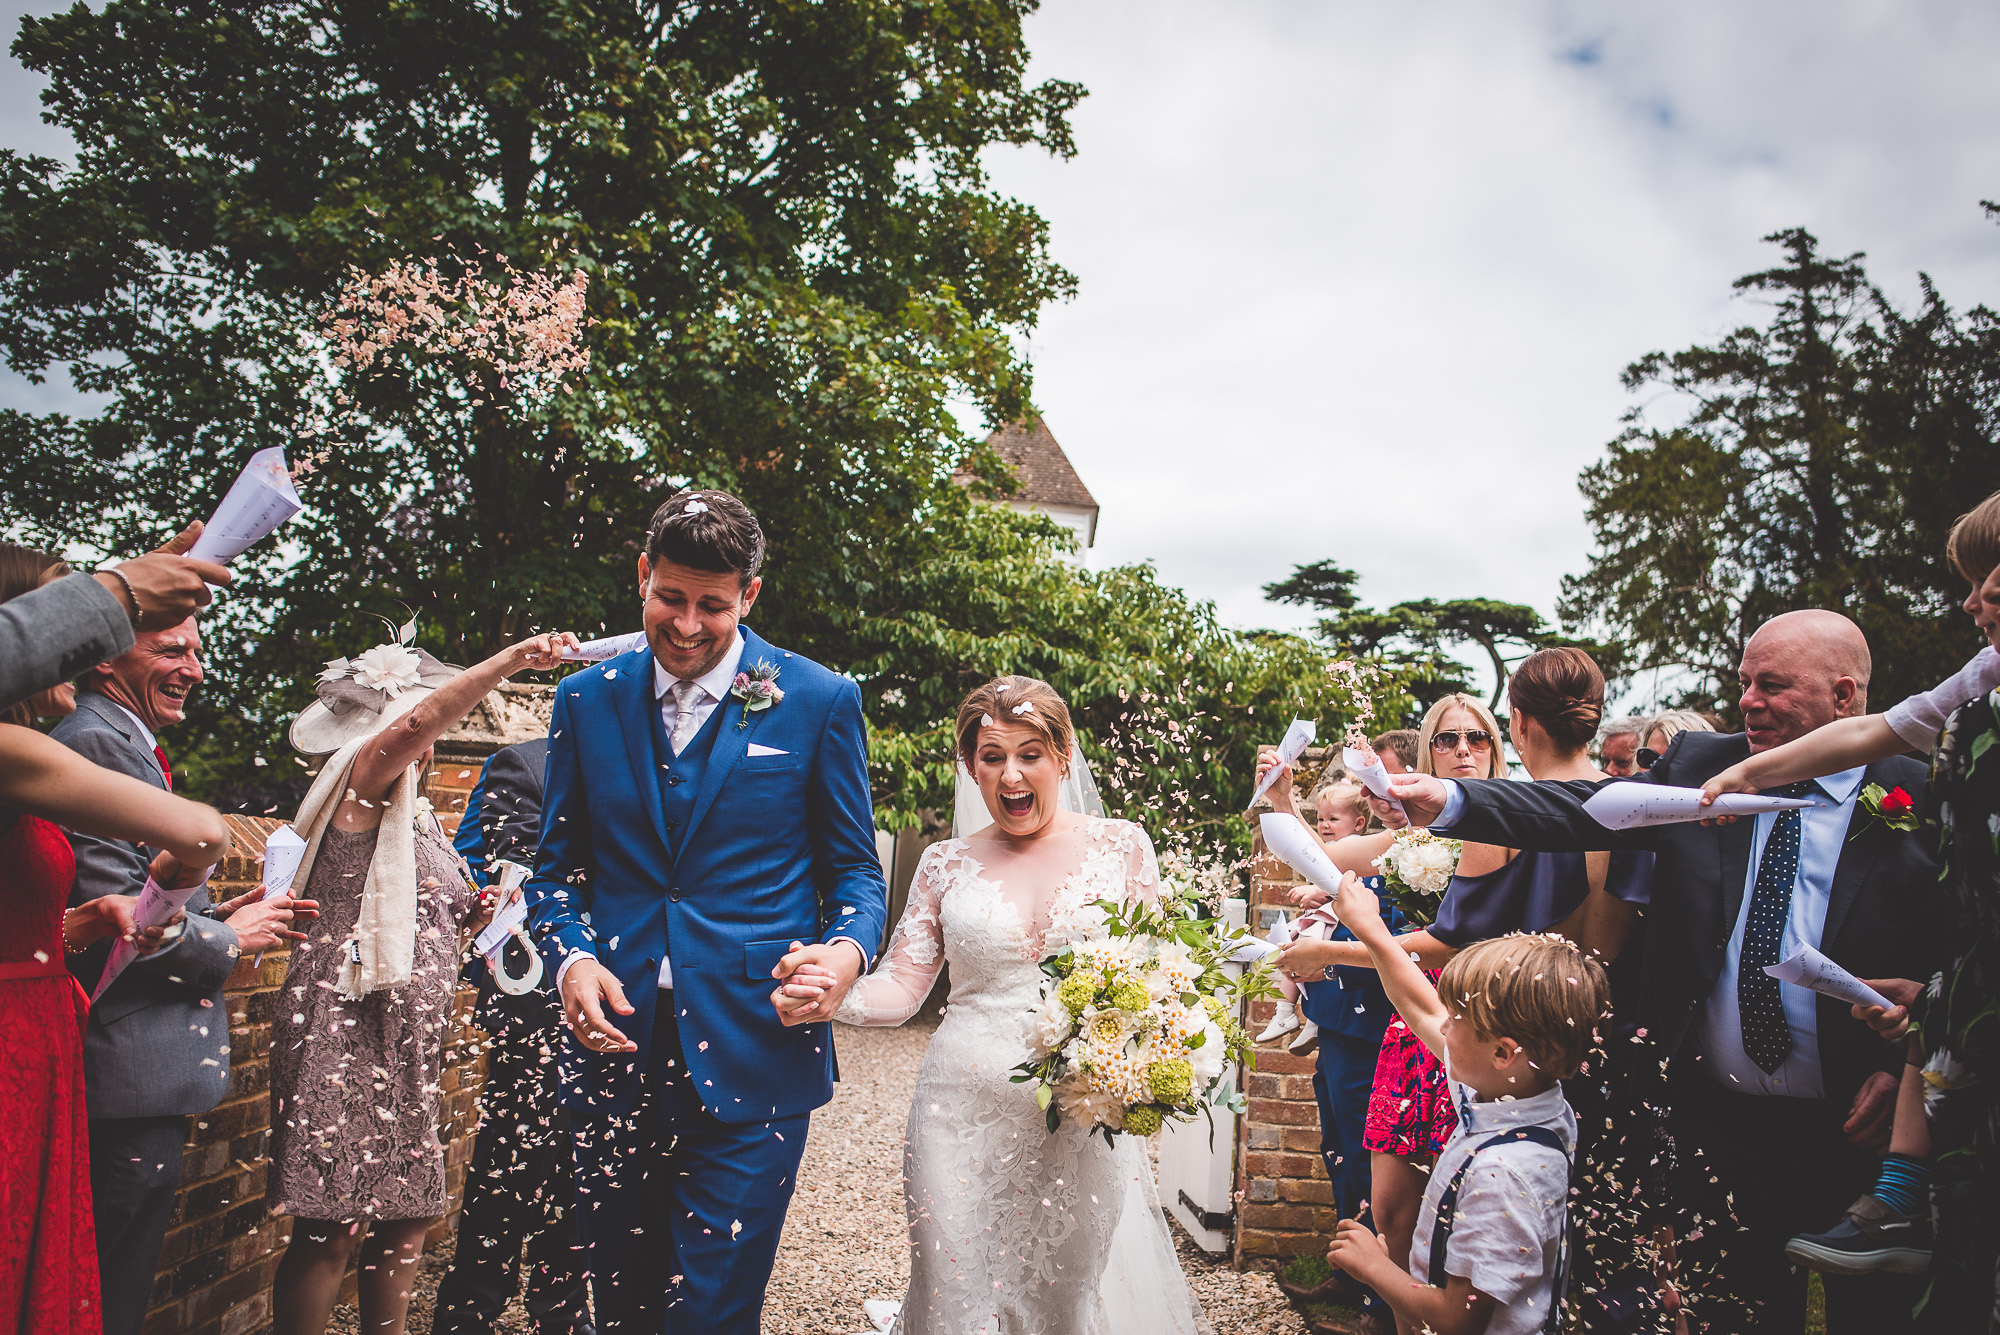 A wedding photographer captures a memorable moment of a bride and groom walking down the aisle amidst confetti.